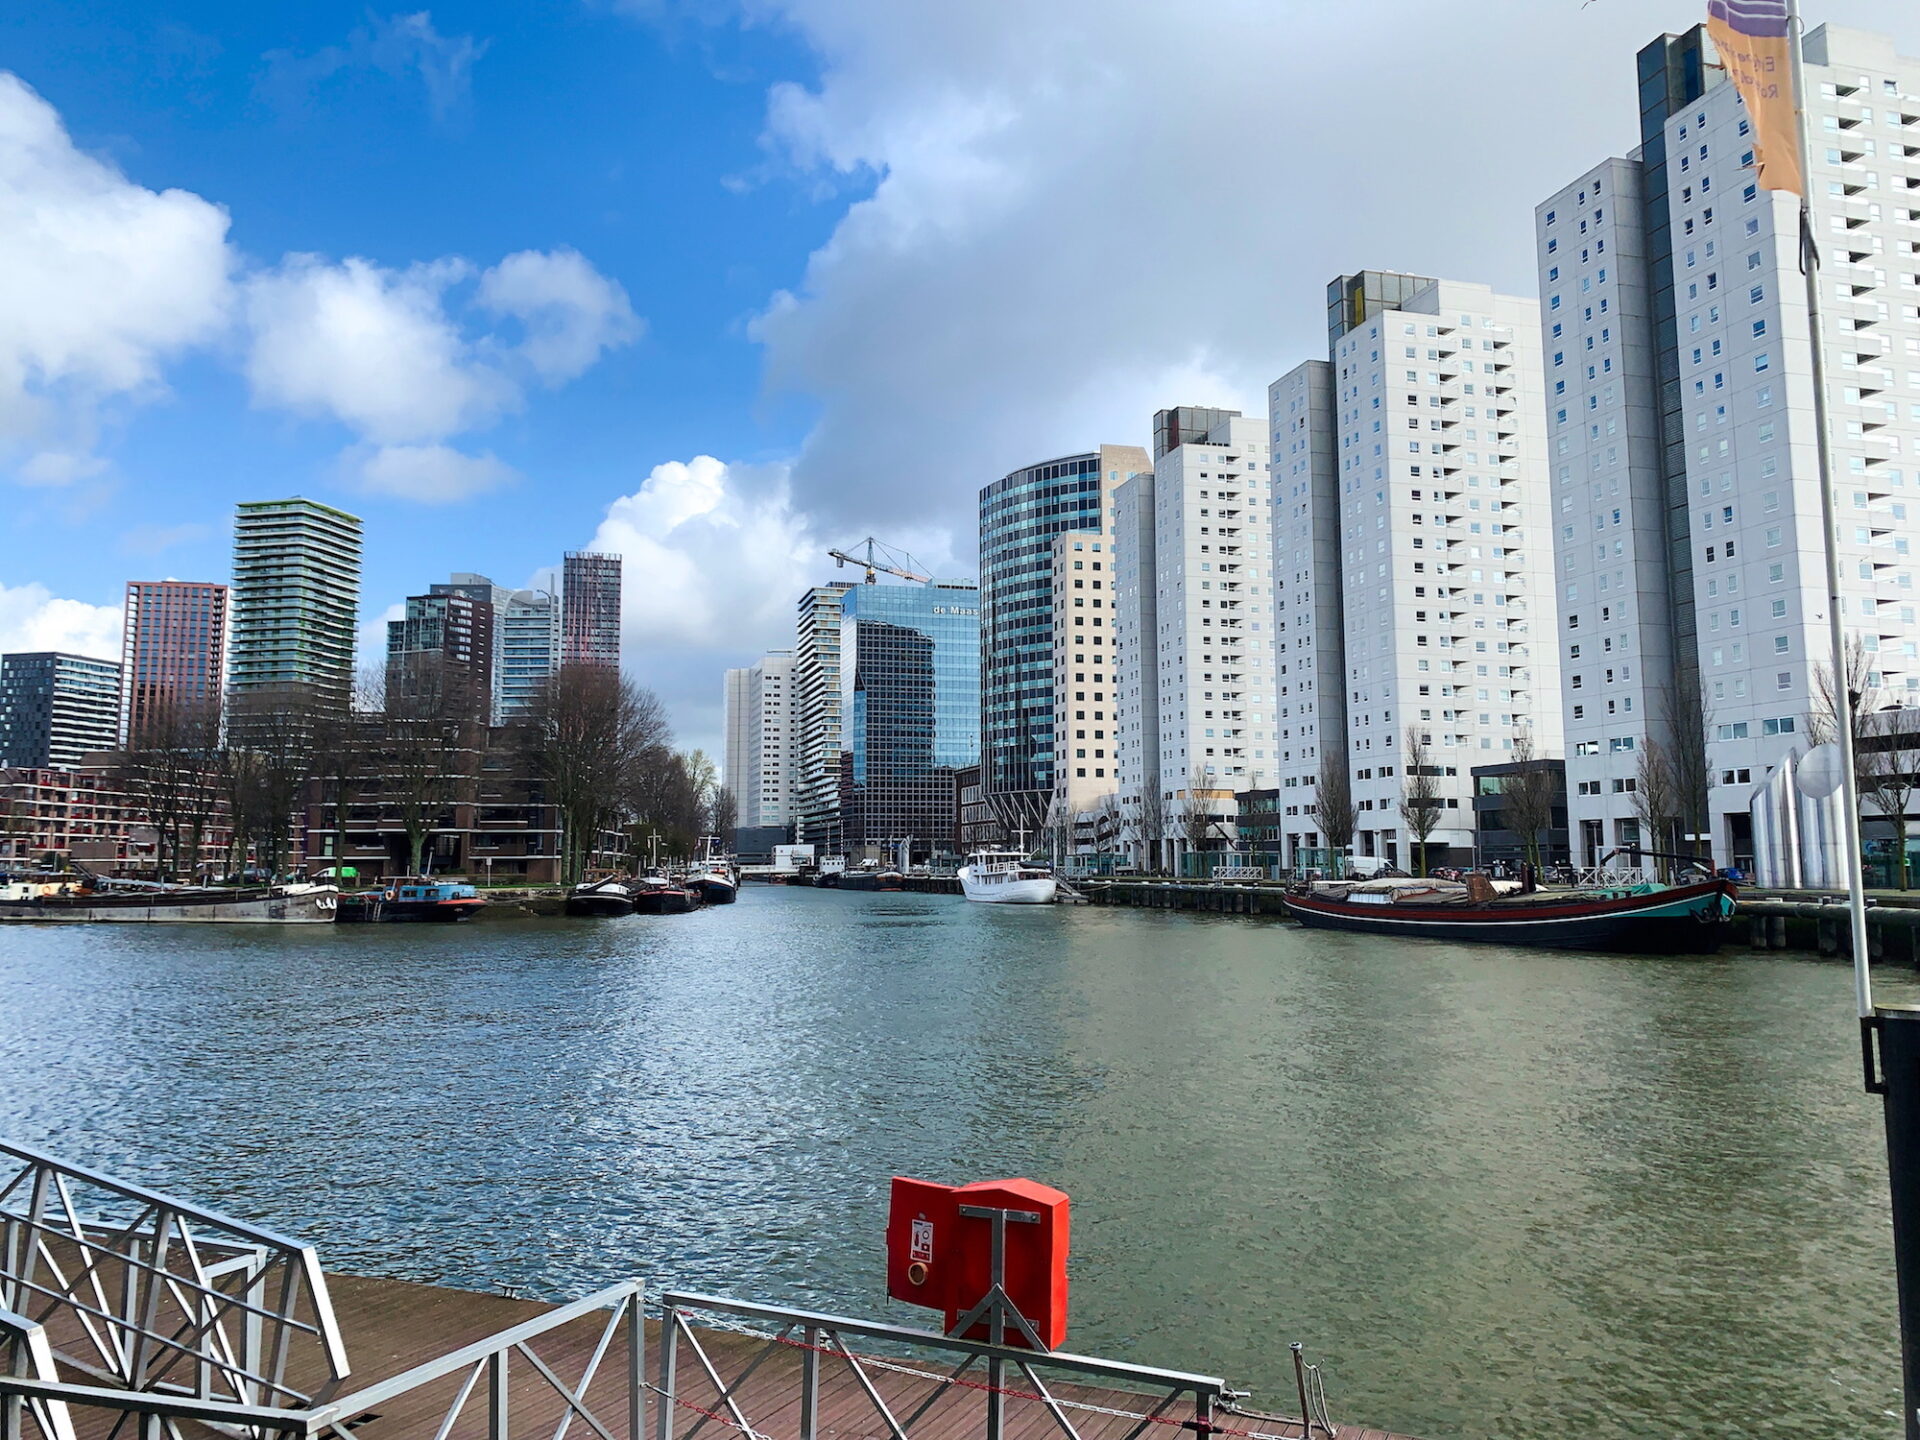 How to Spend One Day in Rotterdam